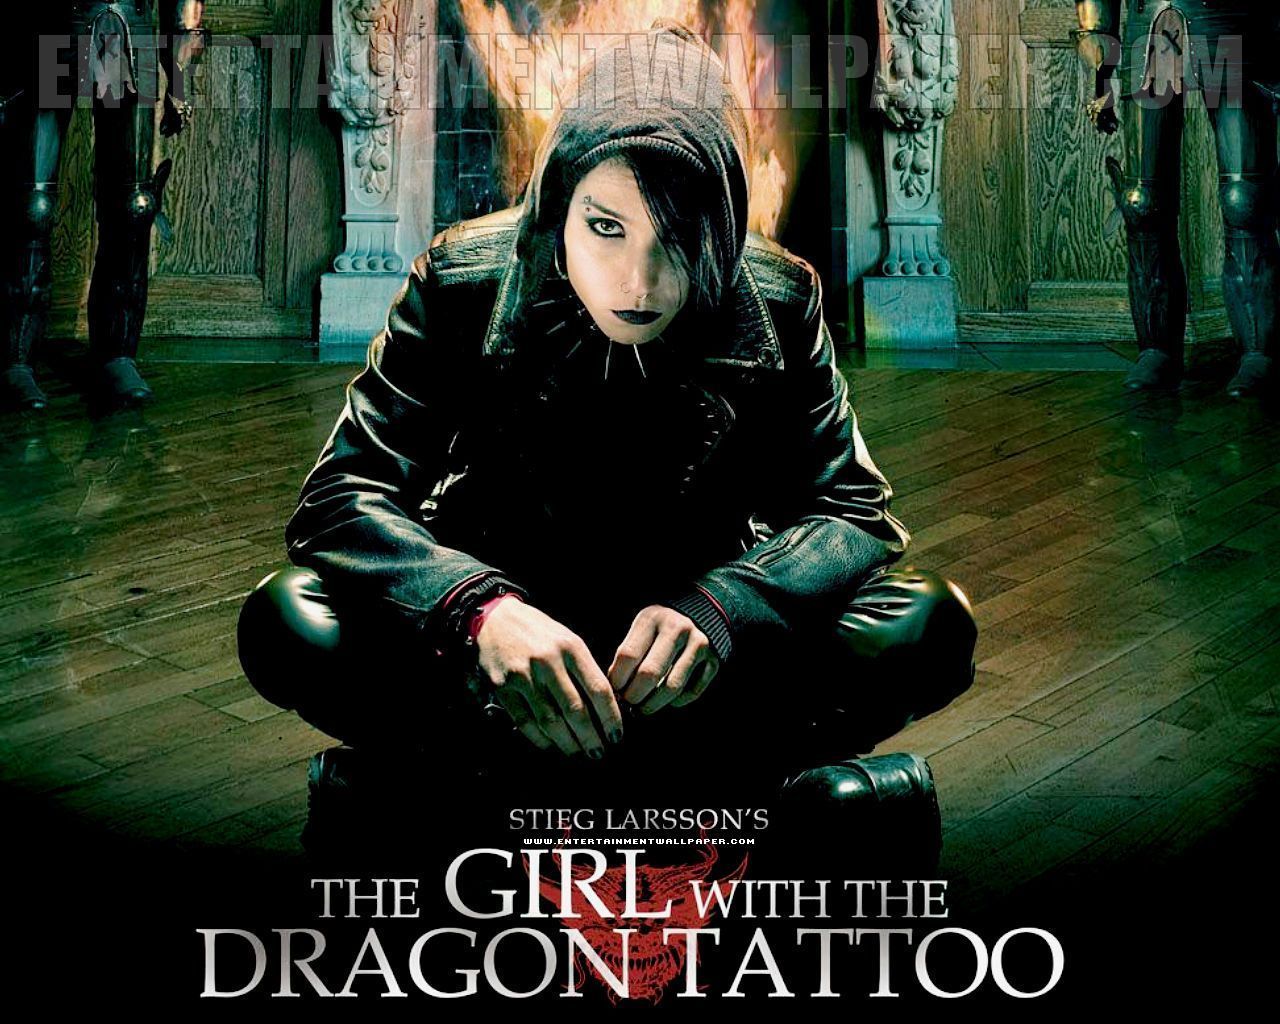 The Girl with the Dragon Tattoo Wallpaper - #10021261 (1280x1024 ...